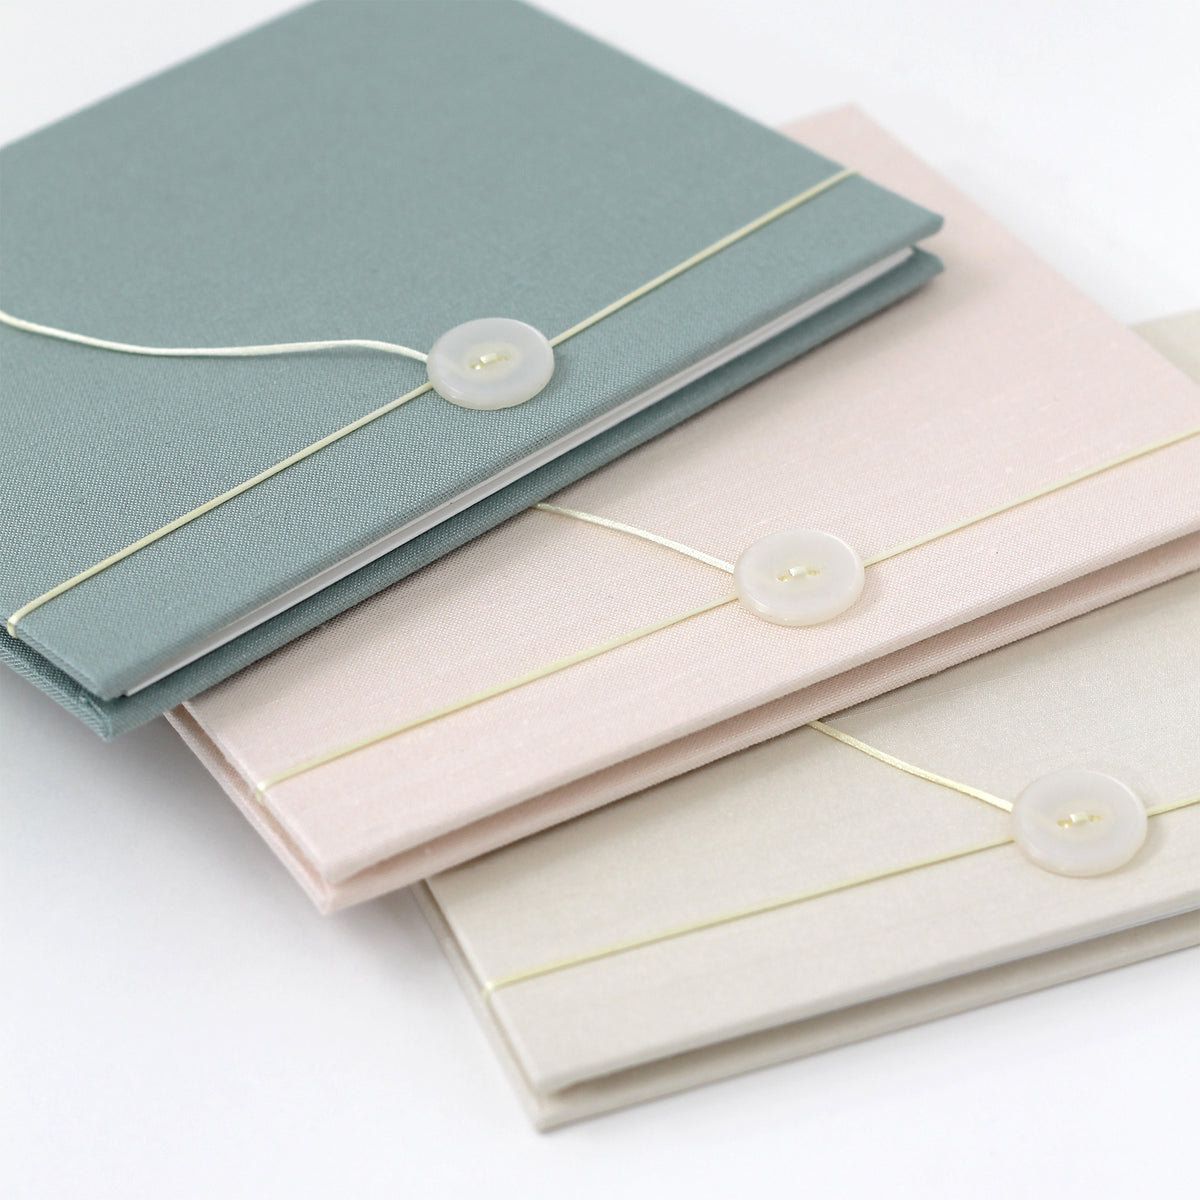 Accordion Book With Pastel Blue Cotton Cover